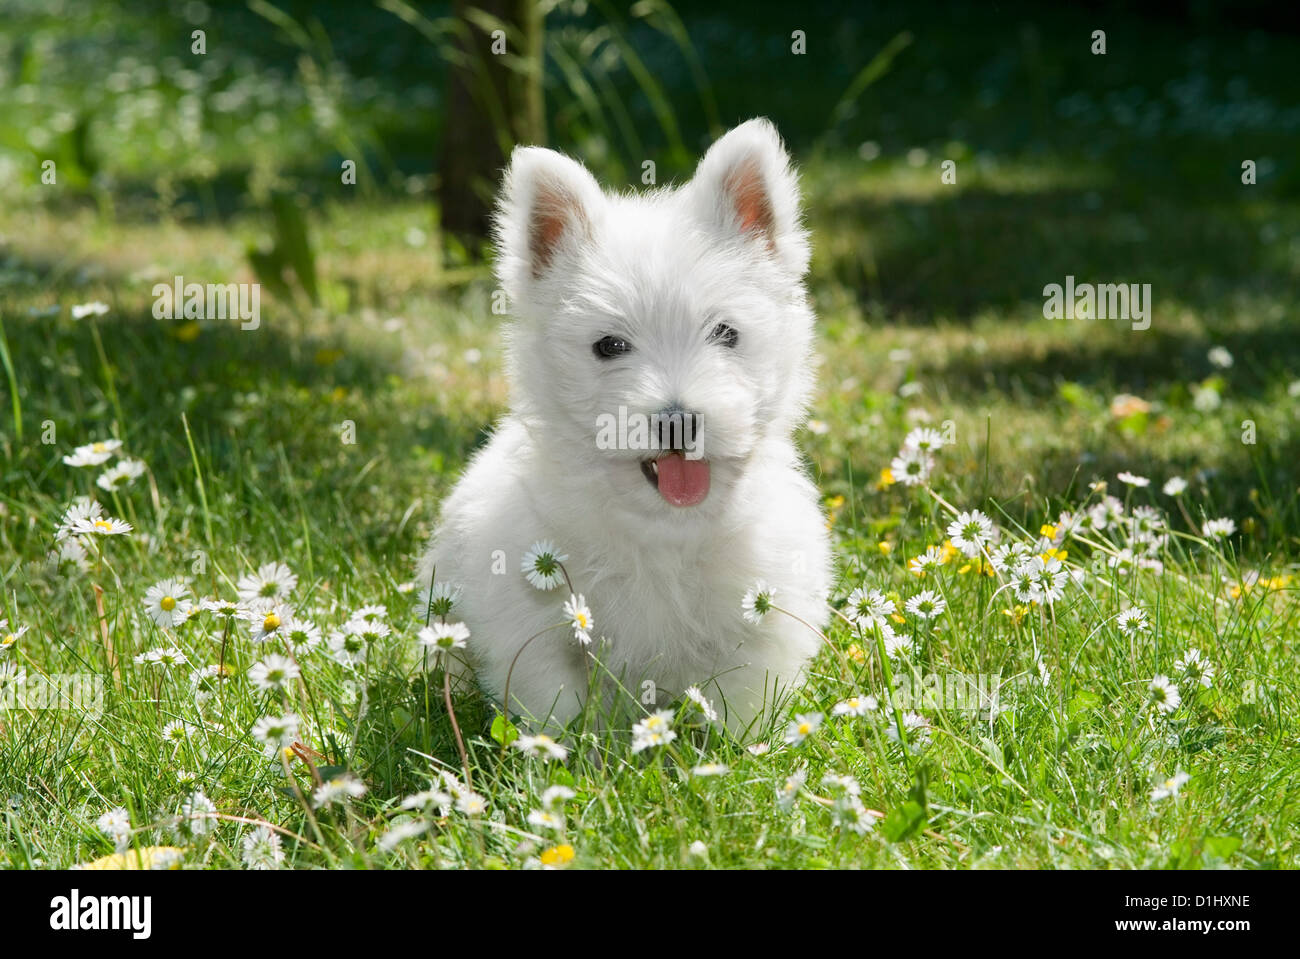 Outdoor portrait of West Highland White Terrier dog in the garden Stock Photo